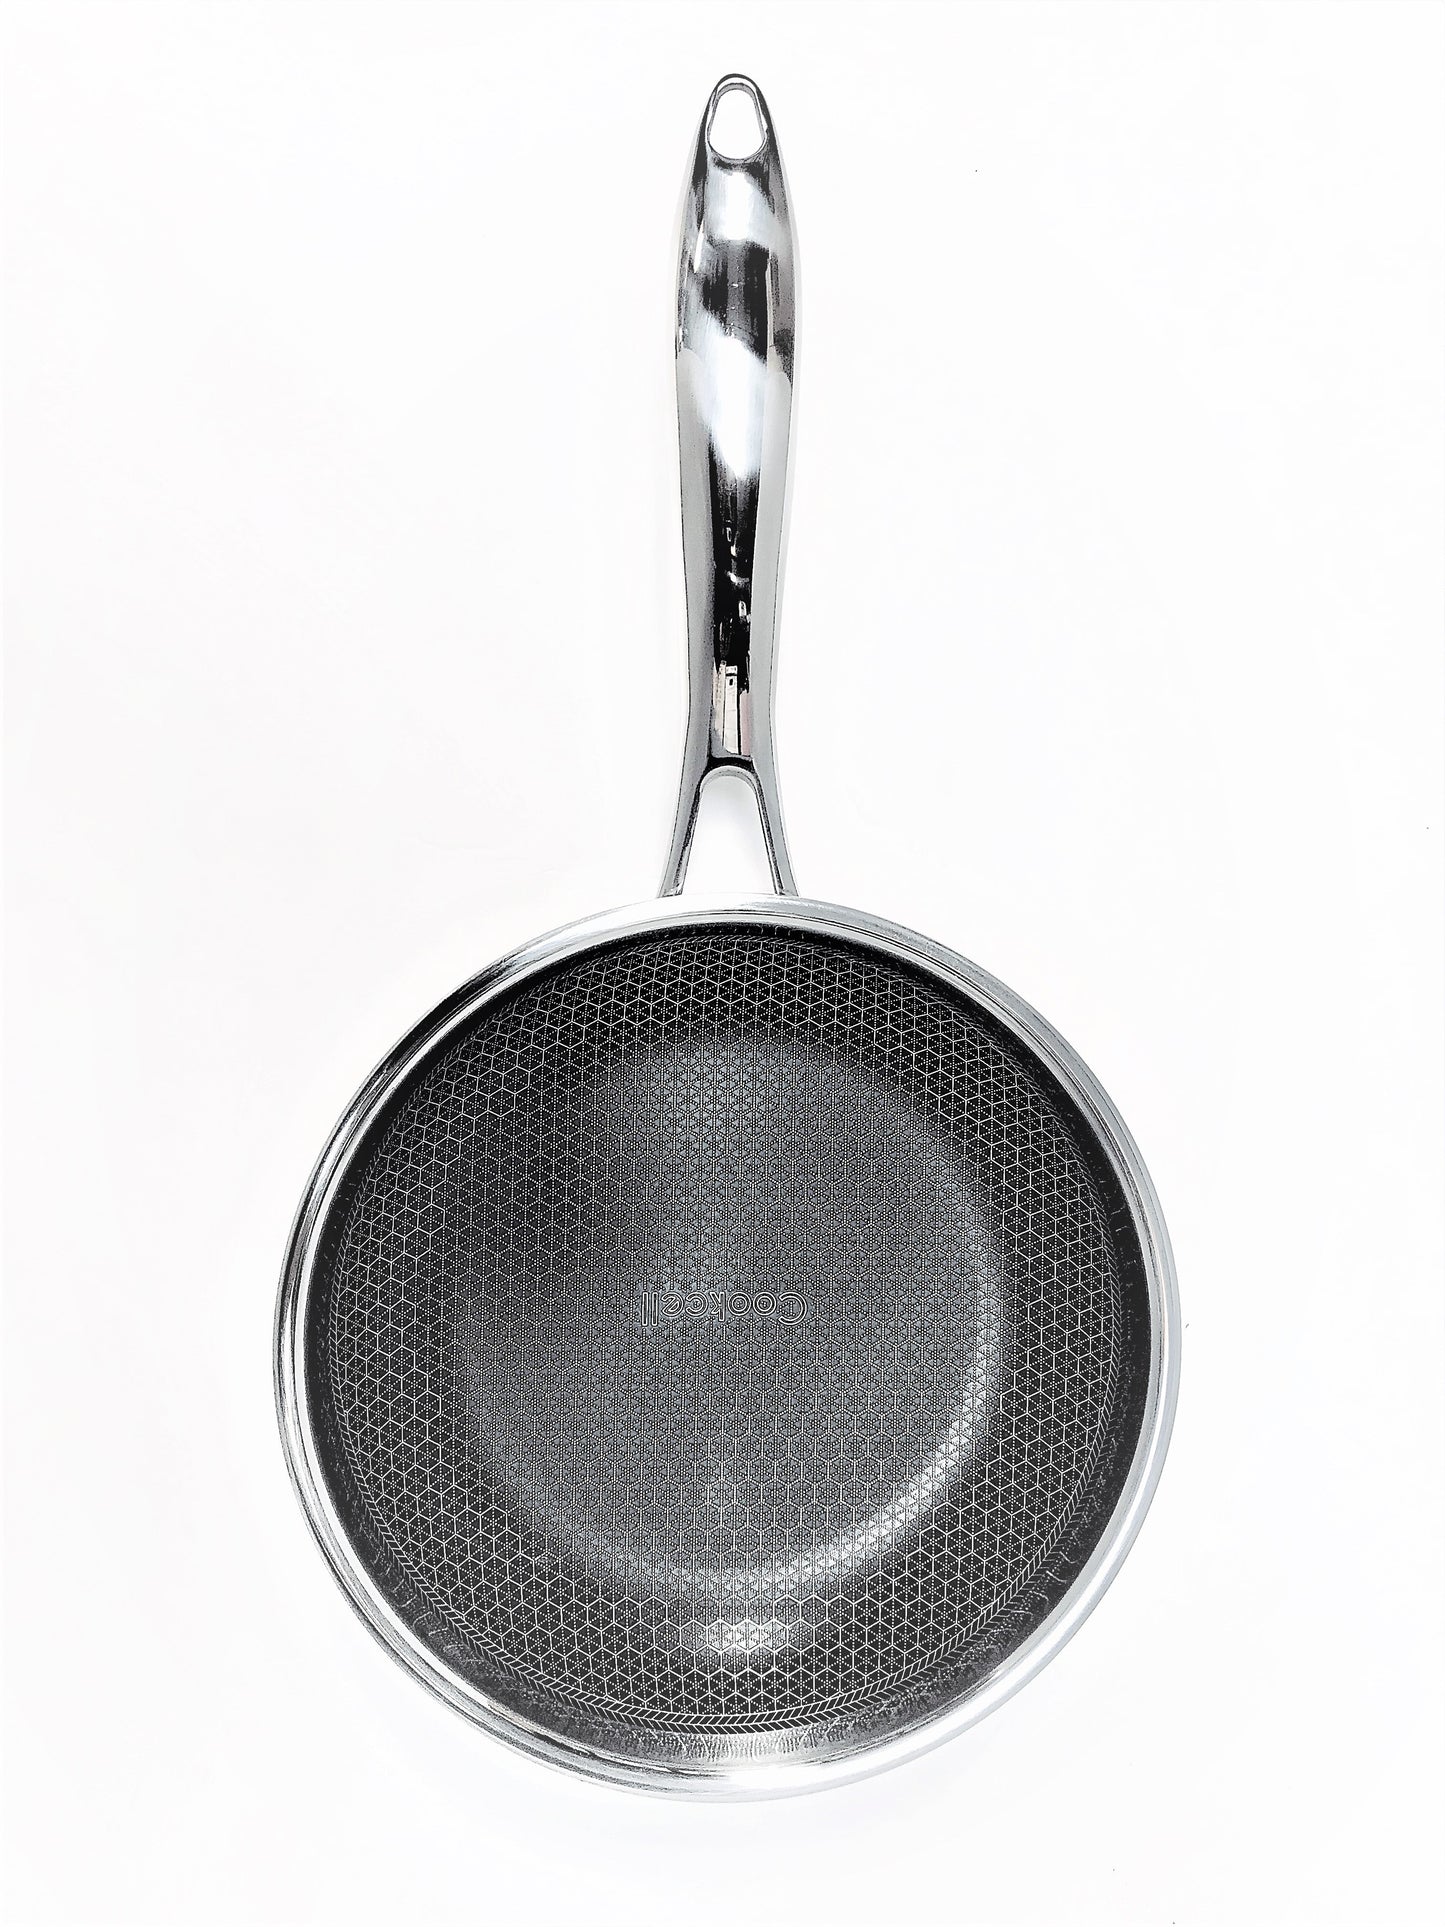 Black Cube Quick Release Stainless Steel Frying Pan, Oven-Safe Cookware